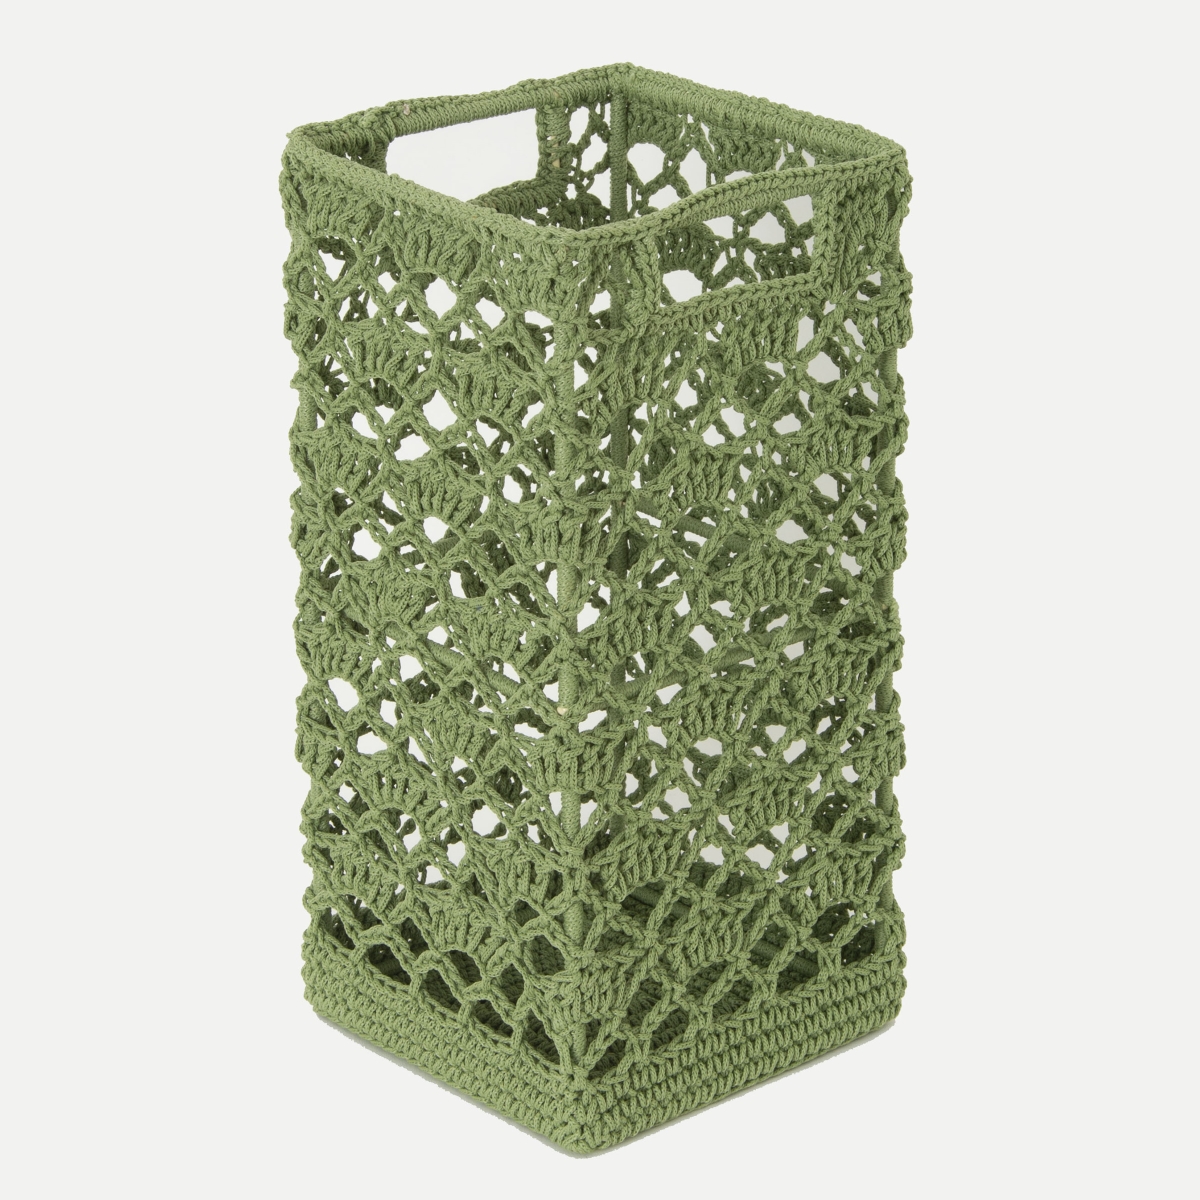 Picture of Heritage Lace MC-1125SG Mode Crochet Basket, Sage - 9 x 5.5 x 5.5 in.